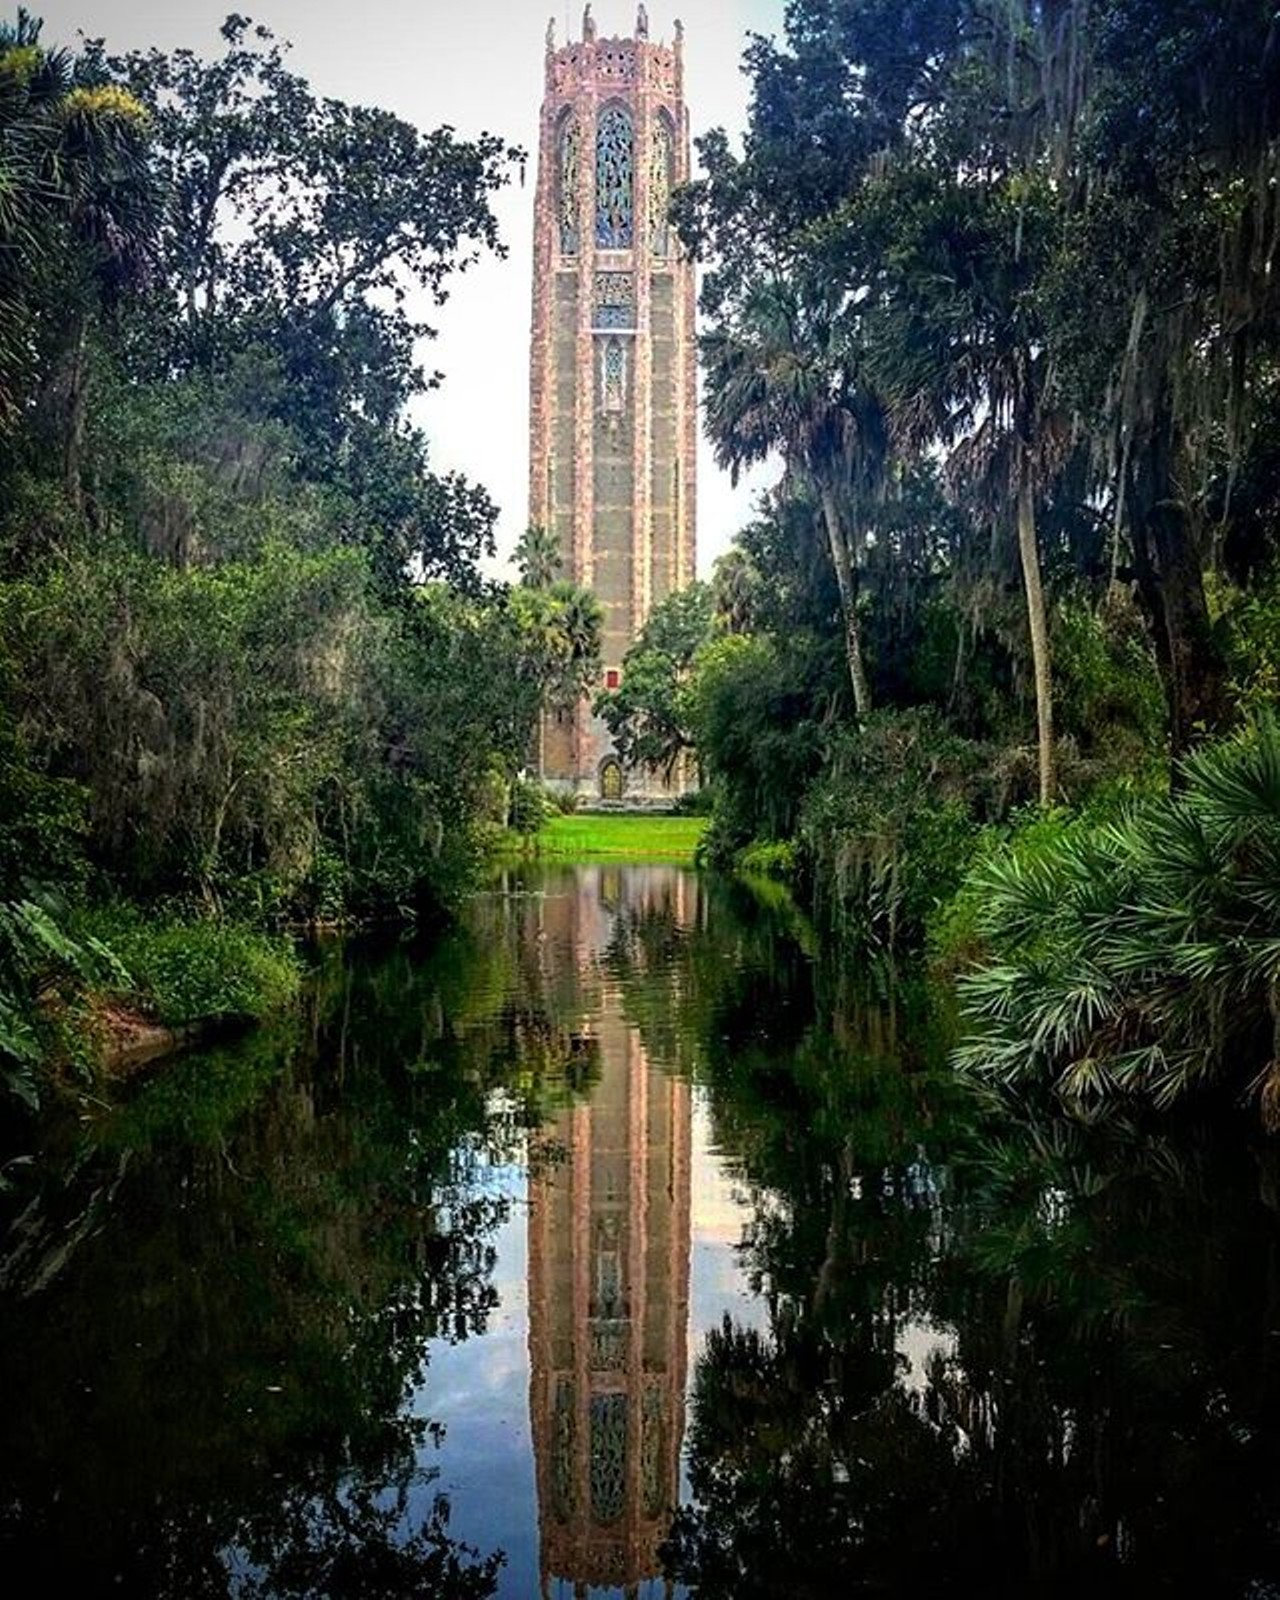 Bok Tower Gardens
1151 Tower Blvd., Lake Wales, 863-676-1408
Distance from Orlando: 1 hour and 19 minutes
At Florida&#146;s highest point, this sanctuary has historic landscape gardens and nature trails. It also has Florida&#146;s first carillon, the Singing Tower.
Photo via mcbring/Instagram